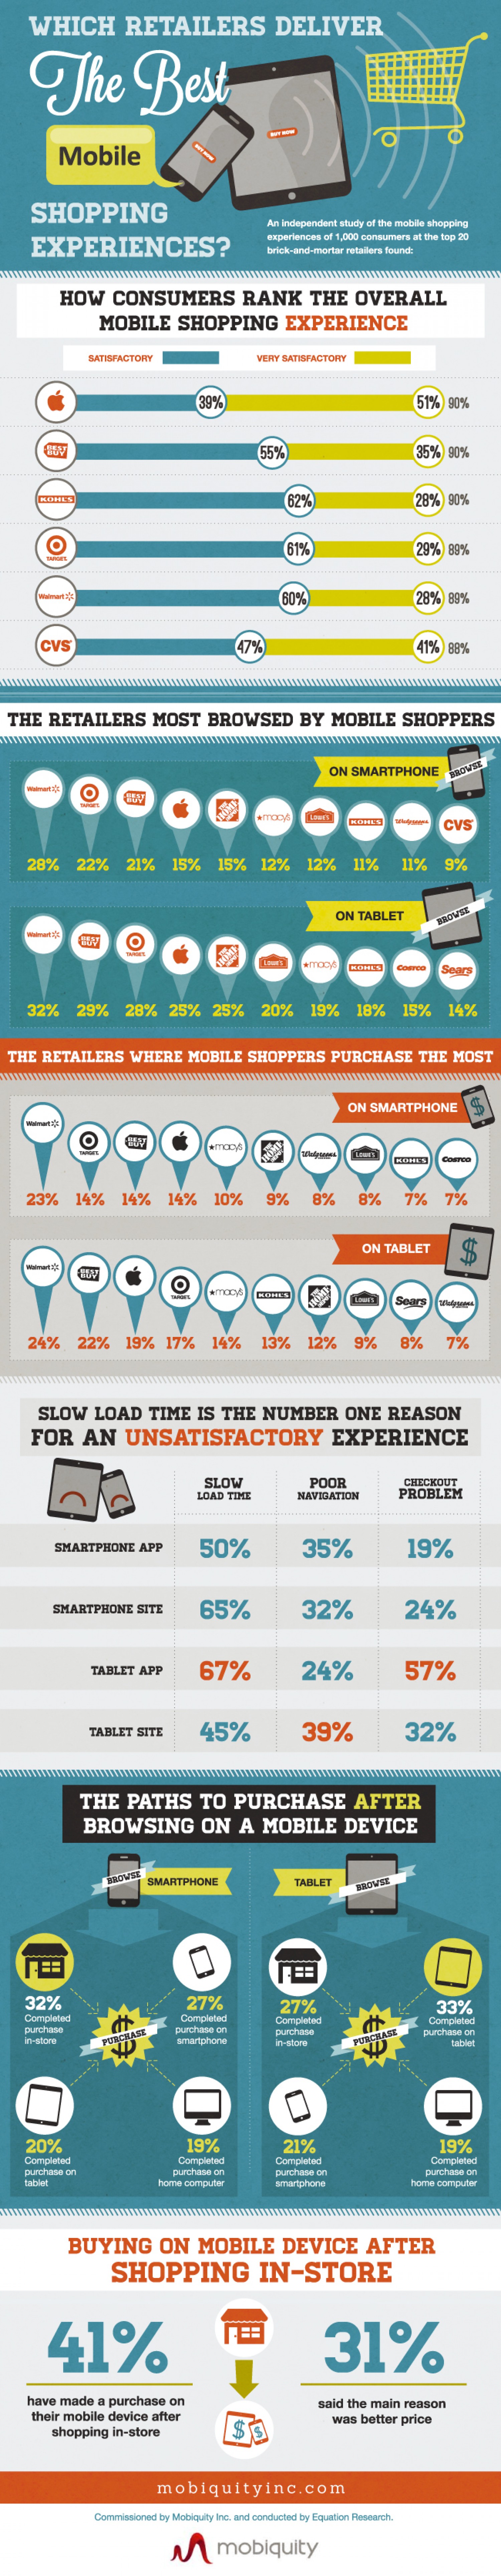 Which retailers deliver the best mobile shopping experience?